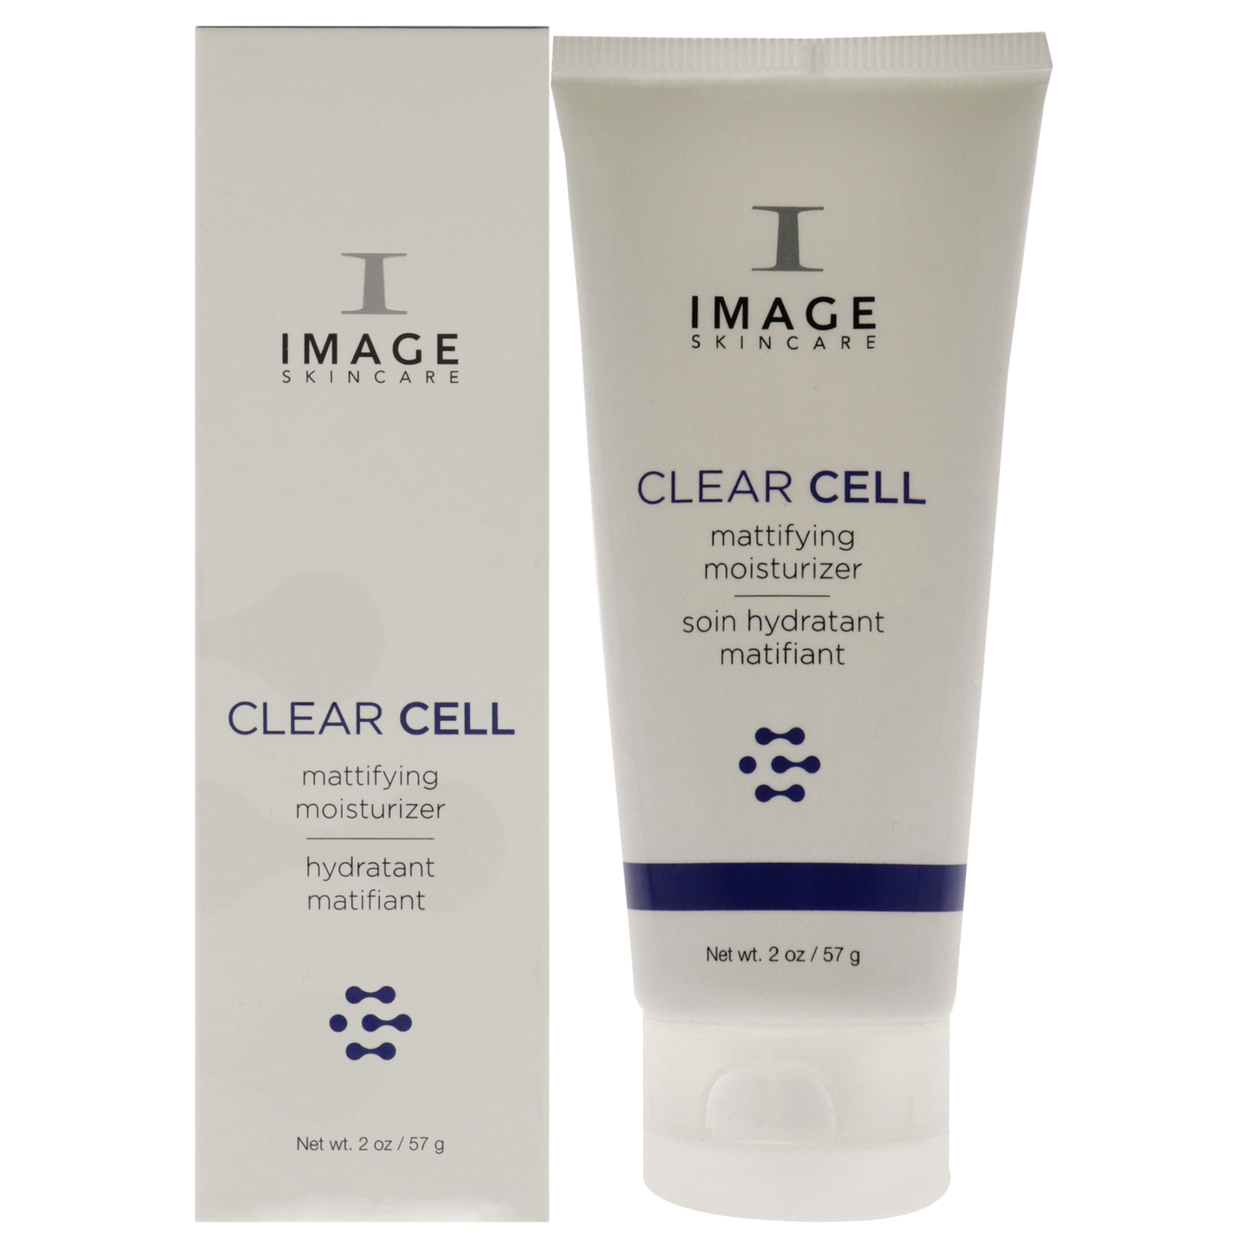 Image Clear Cell Mattifying Moisturizer - Oily Skin 2 Oz